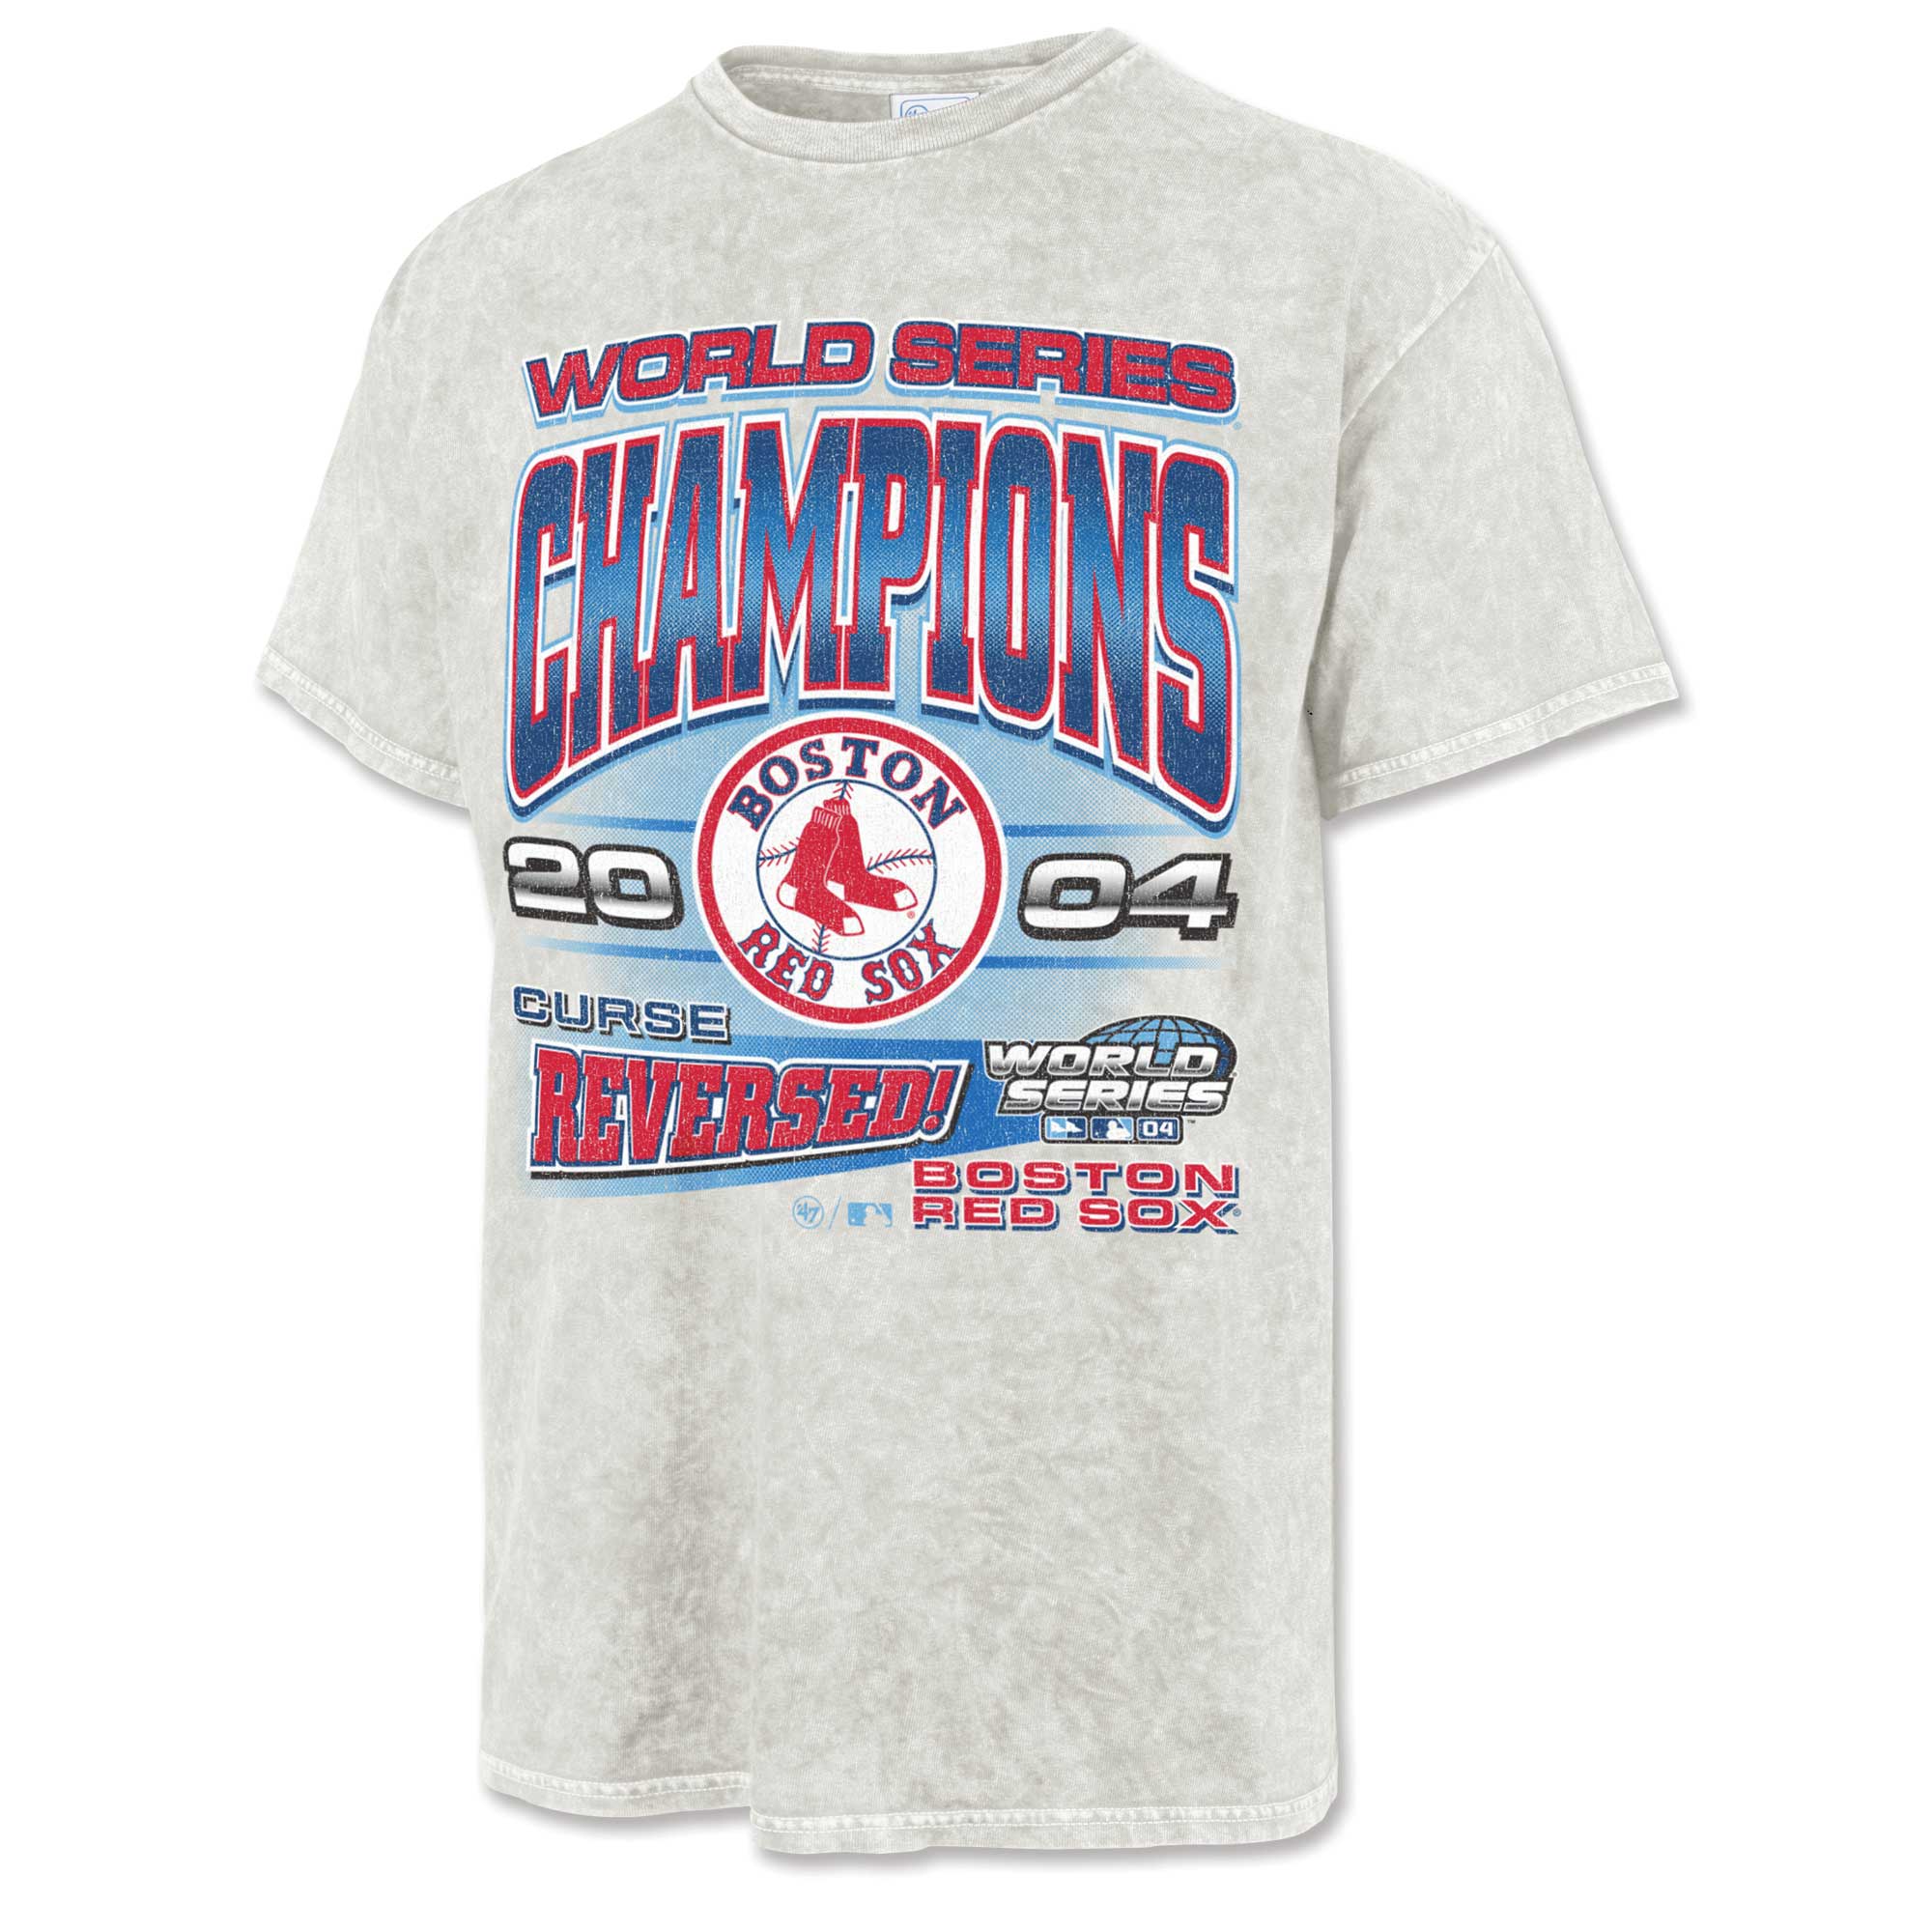 Red Sox Team Store - All You Need to Know BEFORE You Go (with Photos)